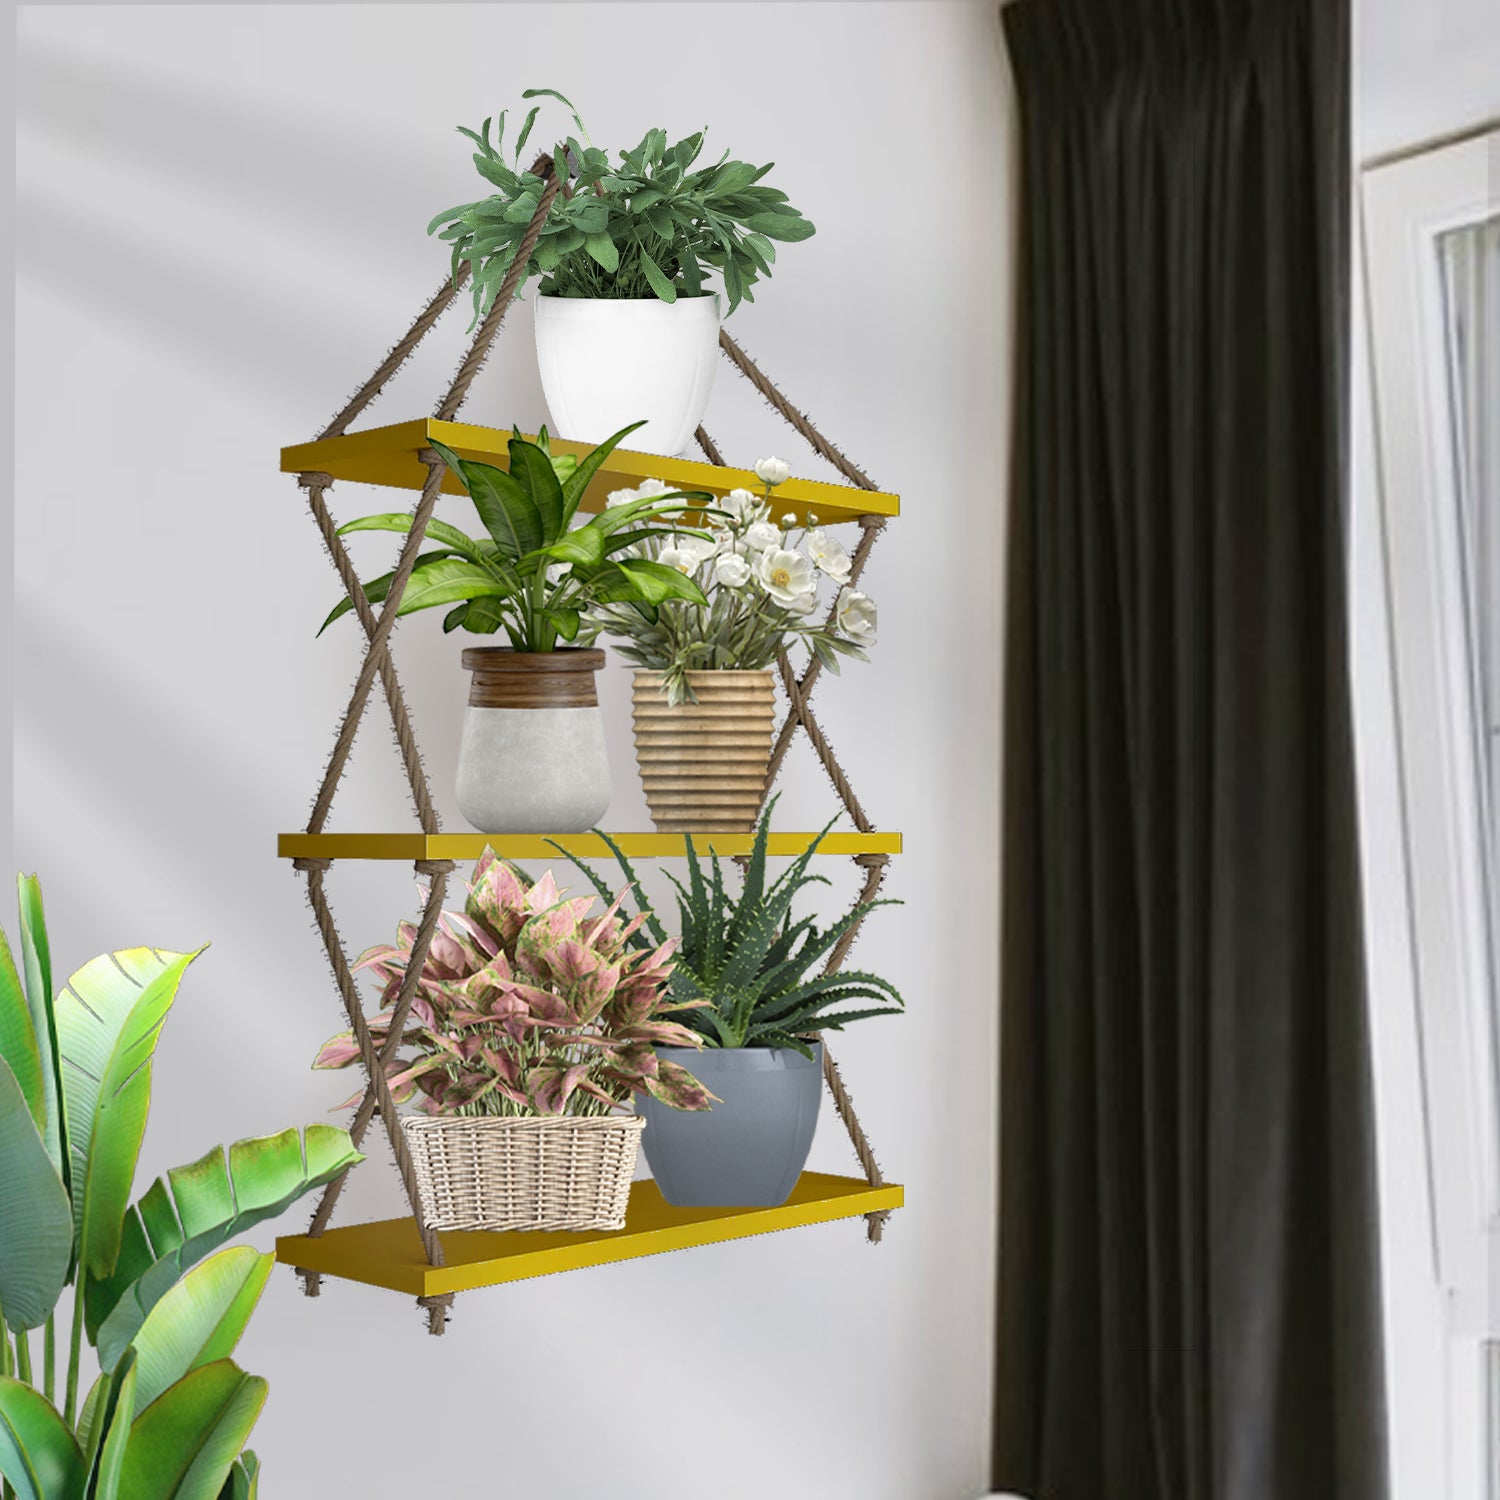  Wooden Wall Hanging Planter Shelf (Yellow Color)